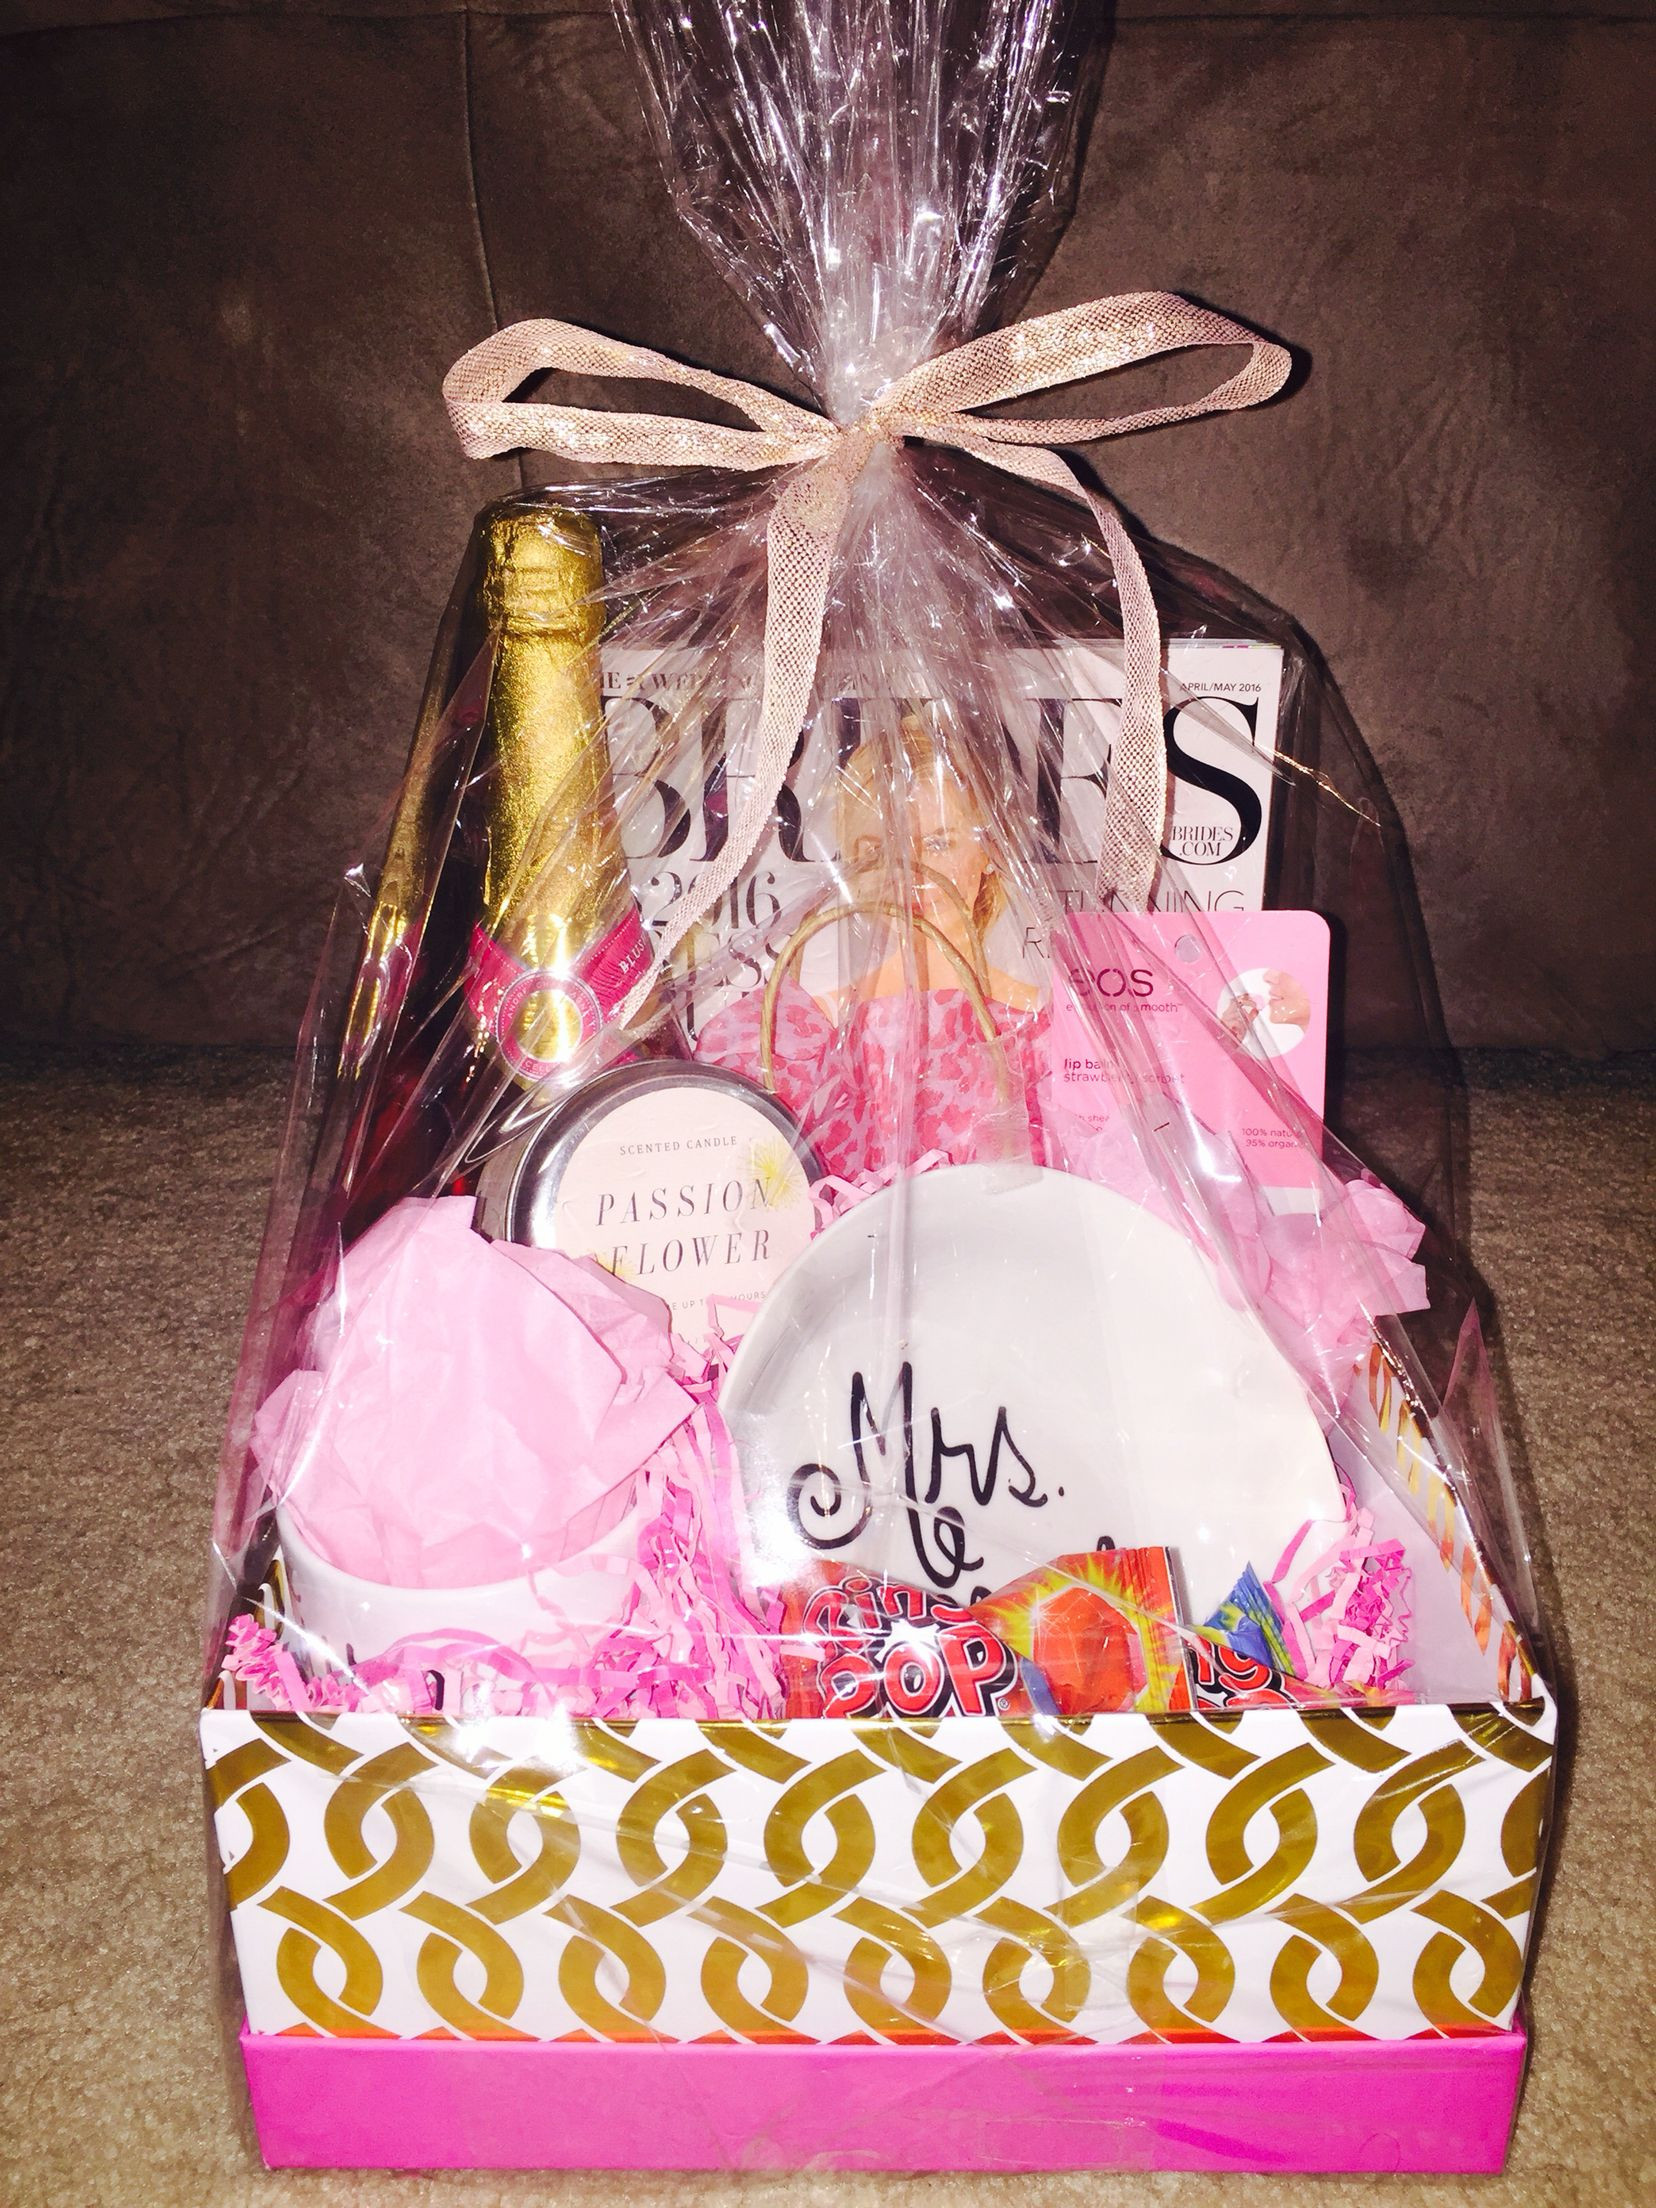 Best Friend Wedding Gift
 Engagement t basket I made for my newly engaged best